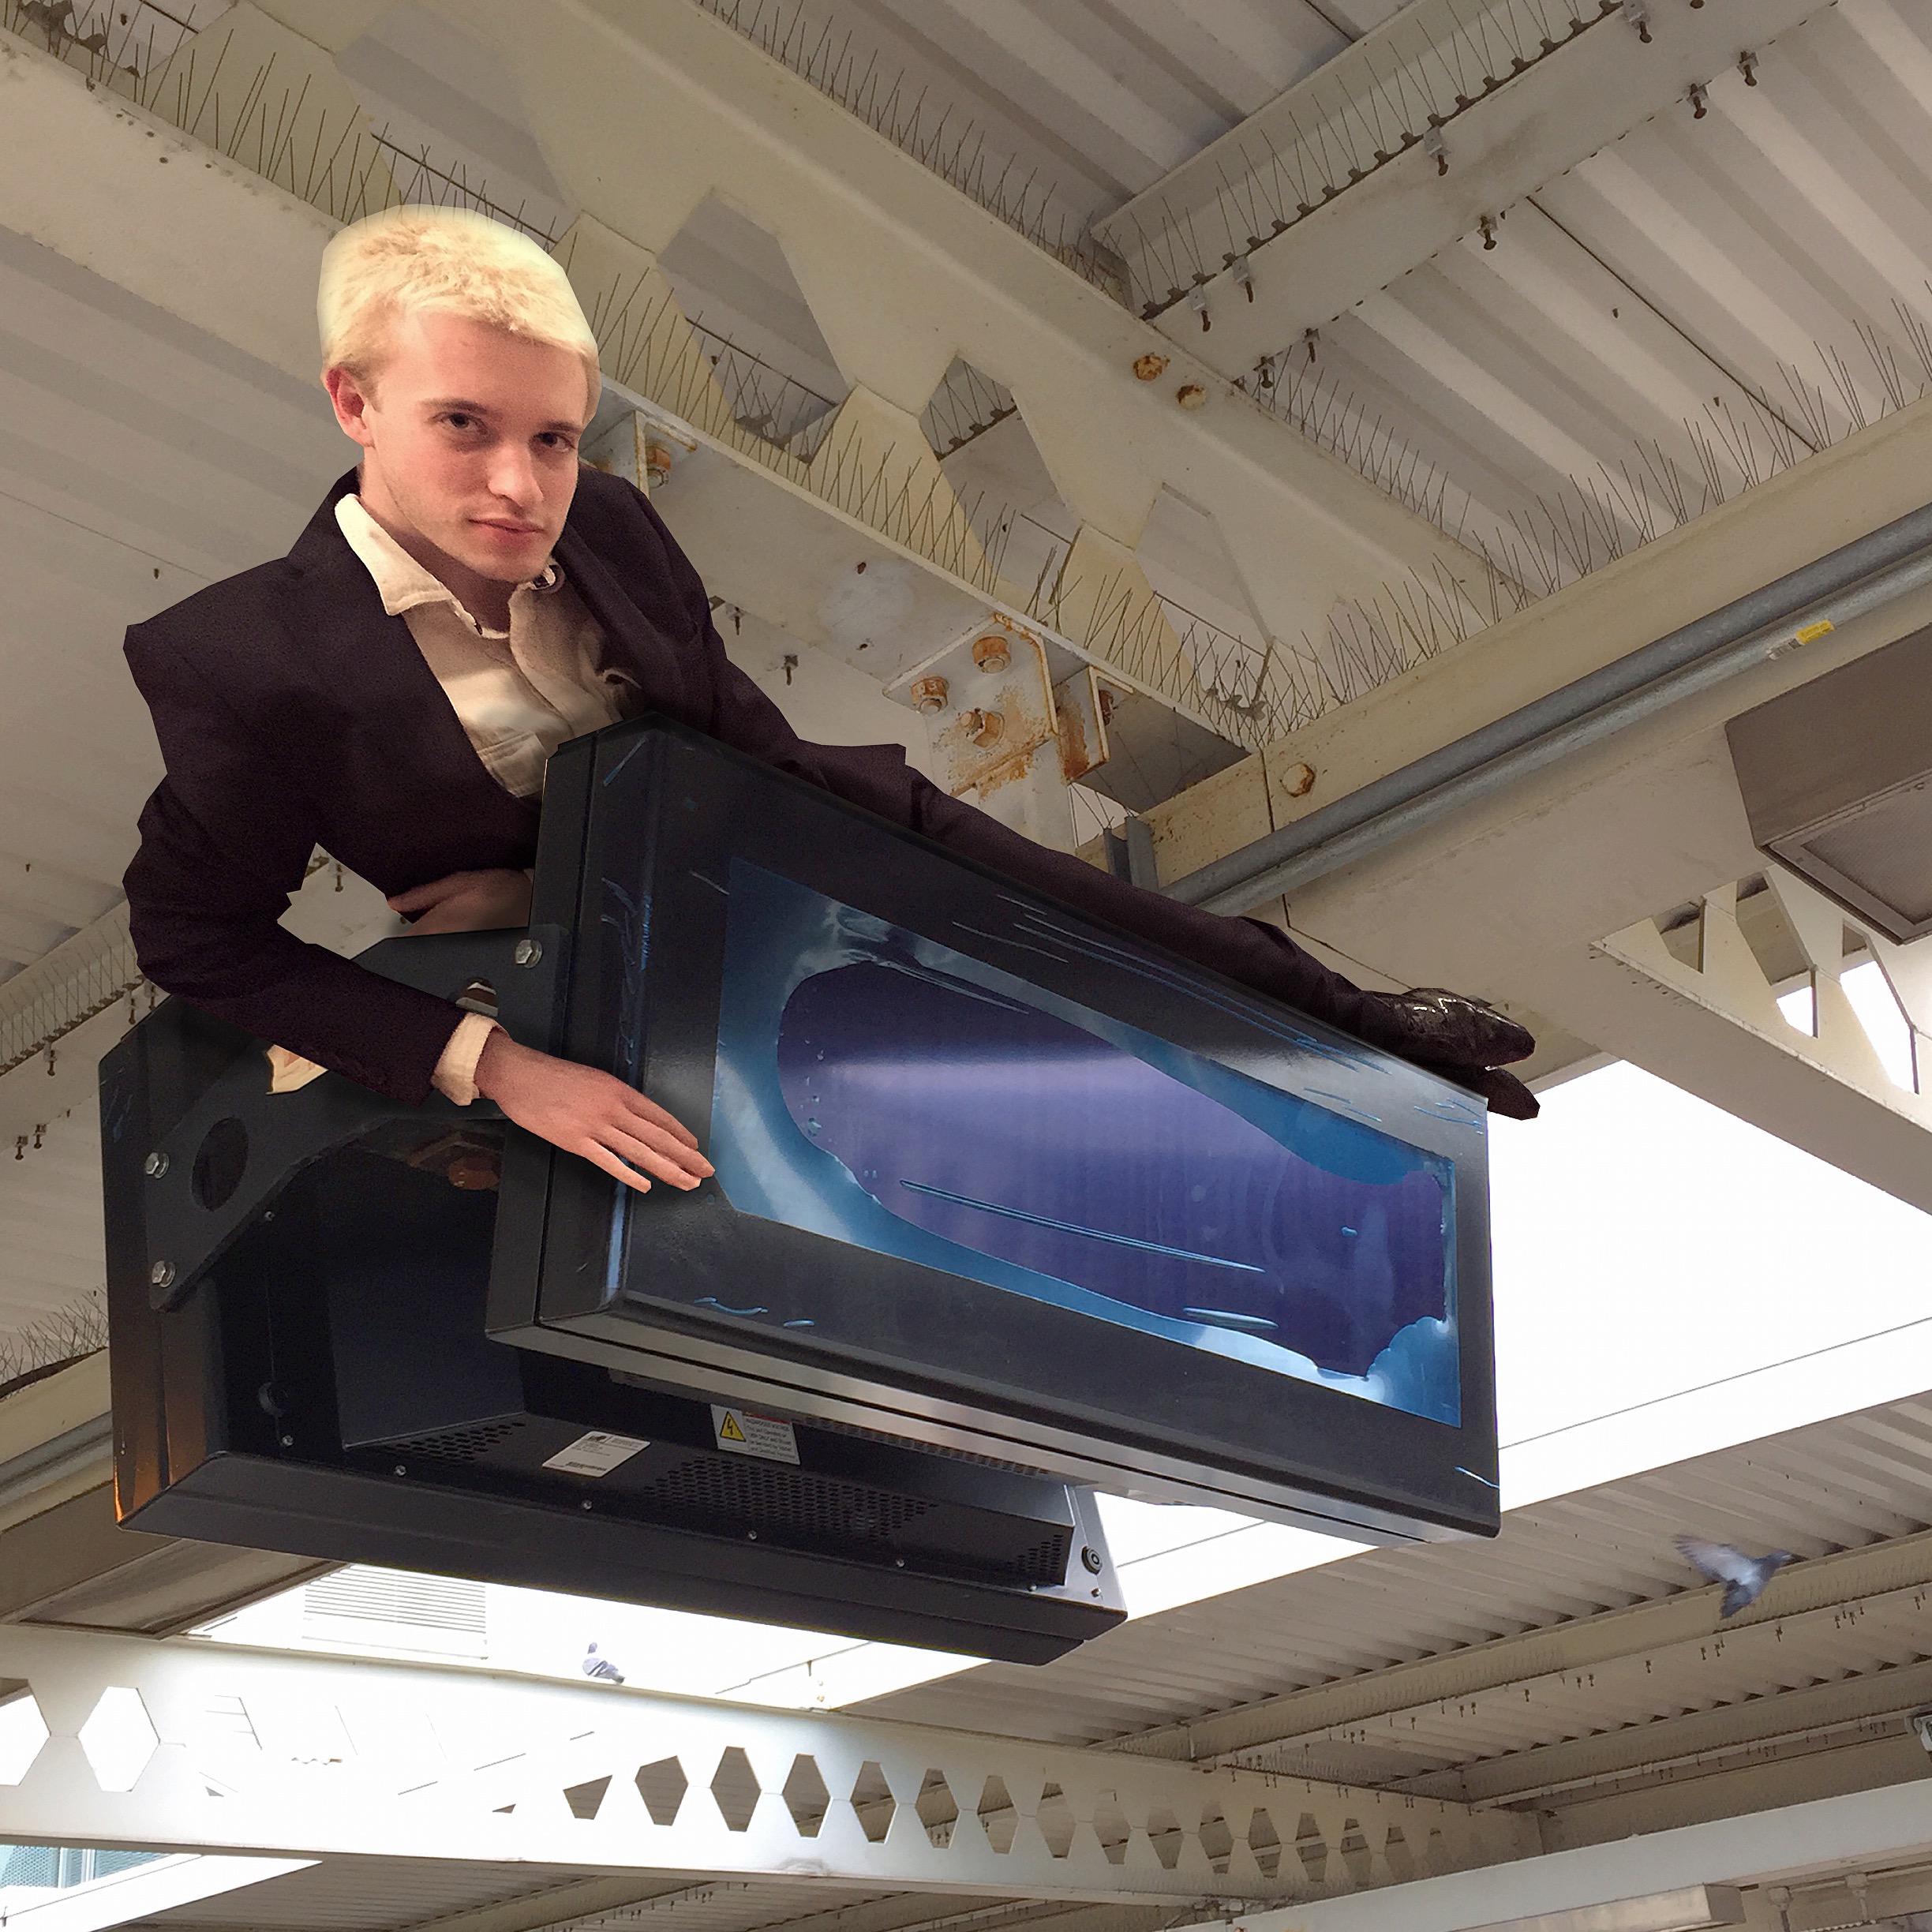 Butler laying across an LED information screen in a train station